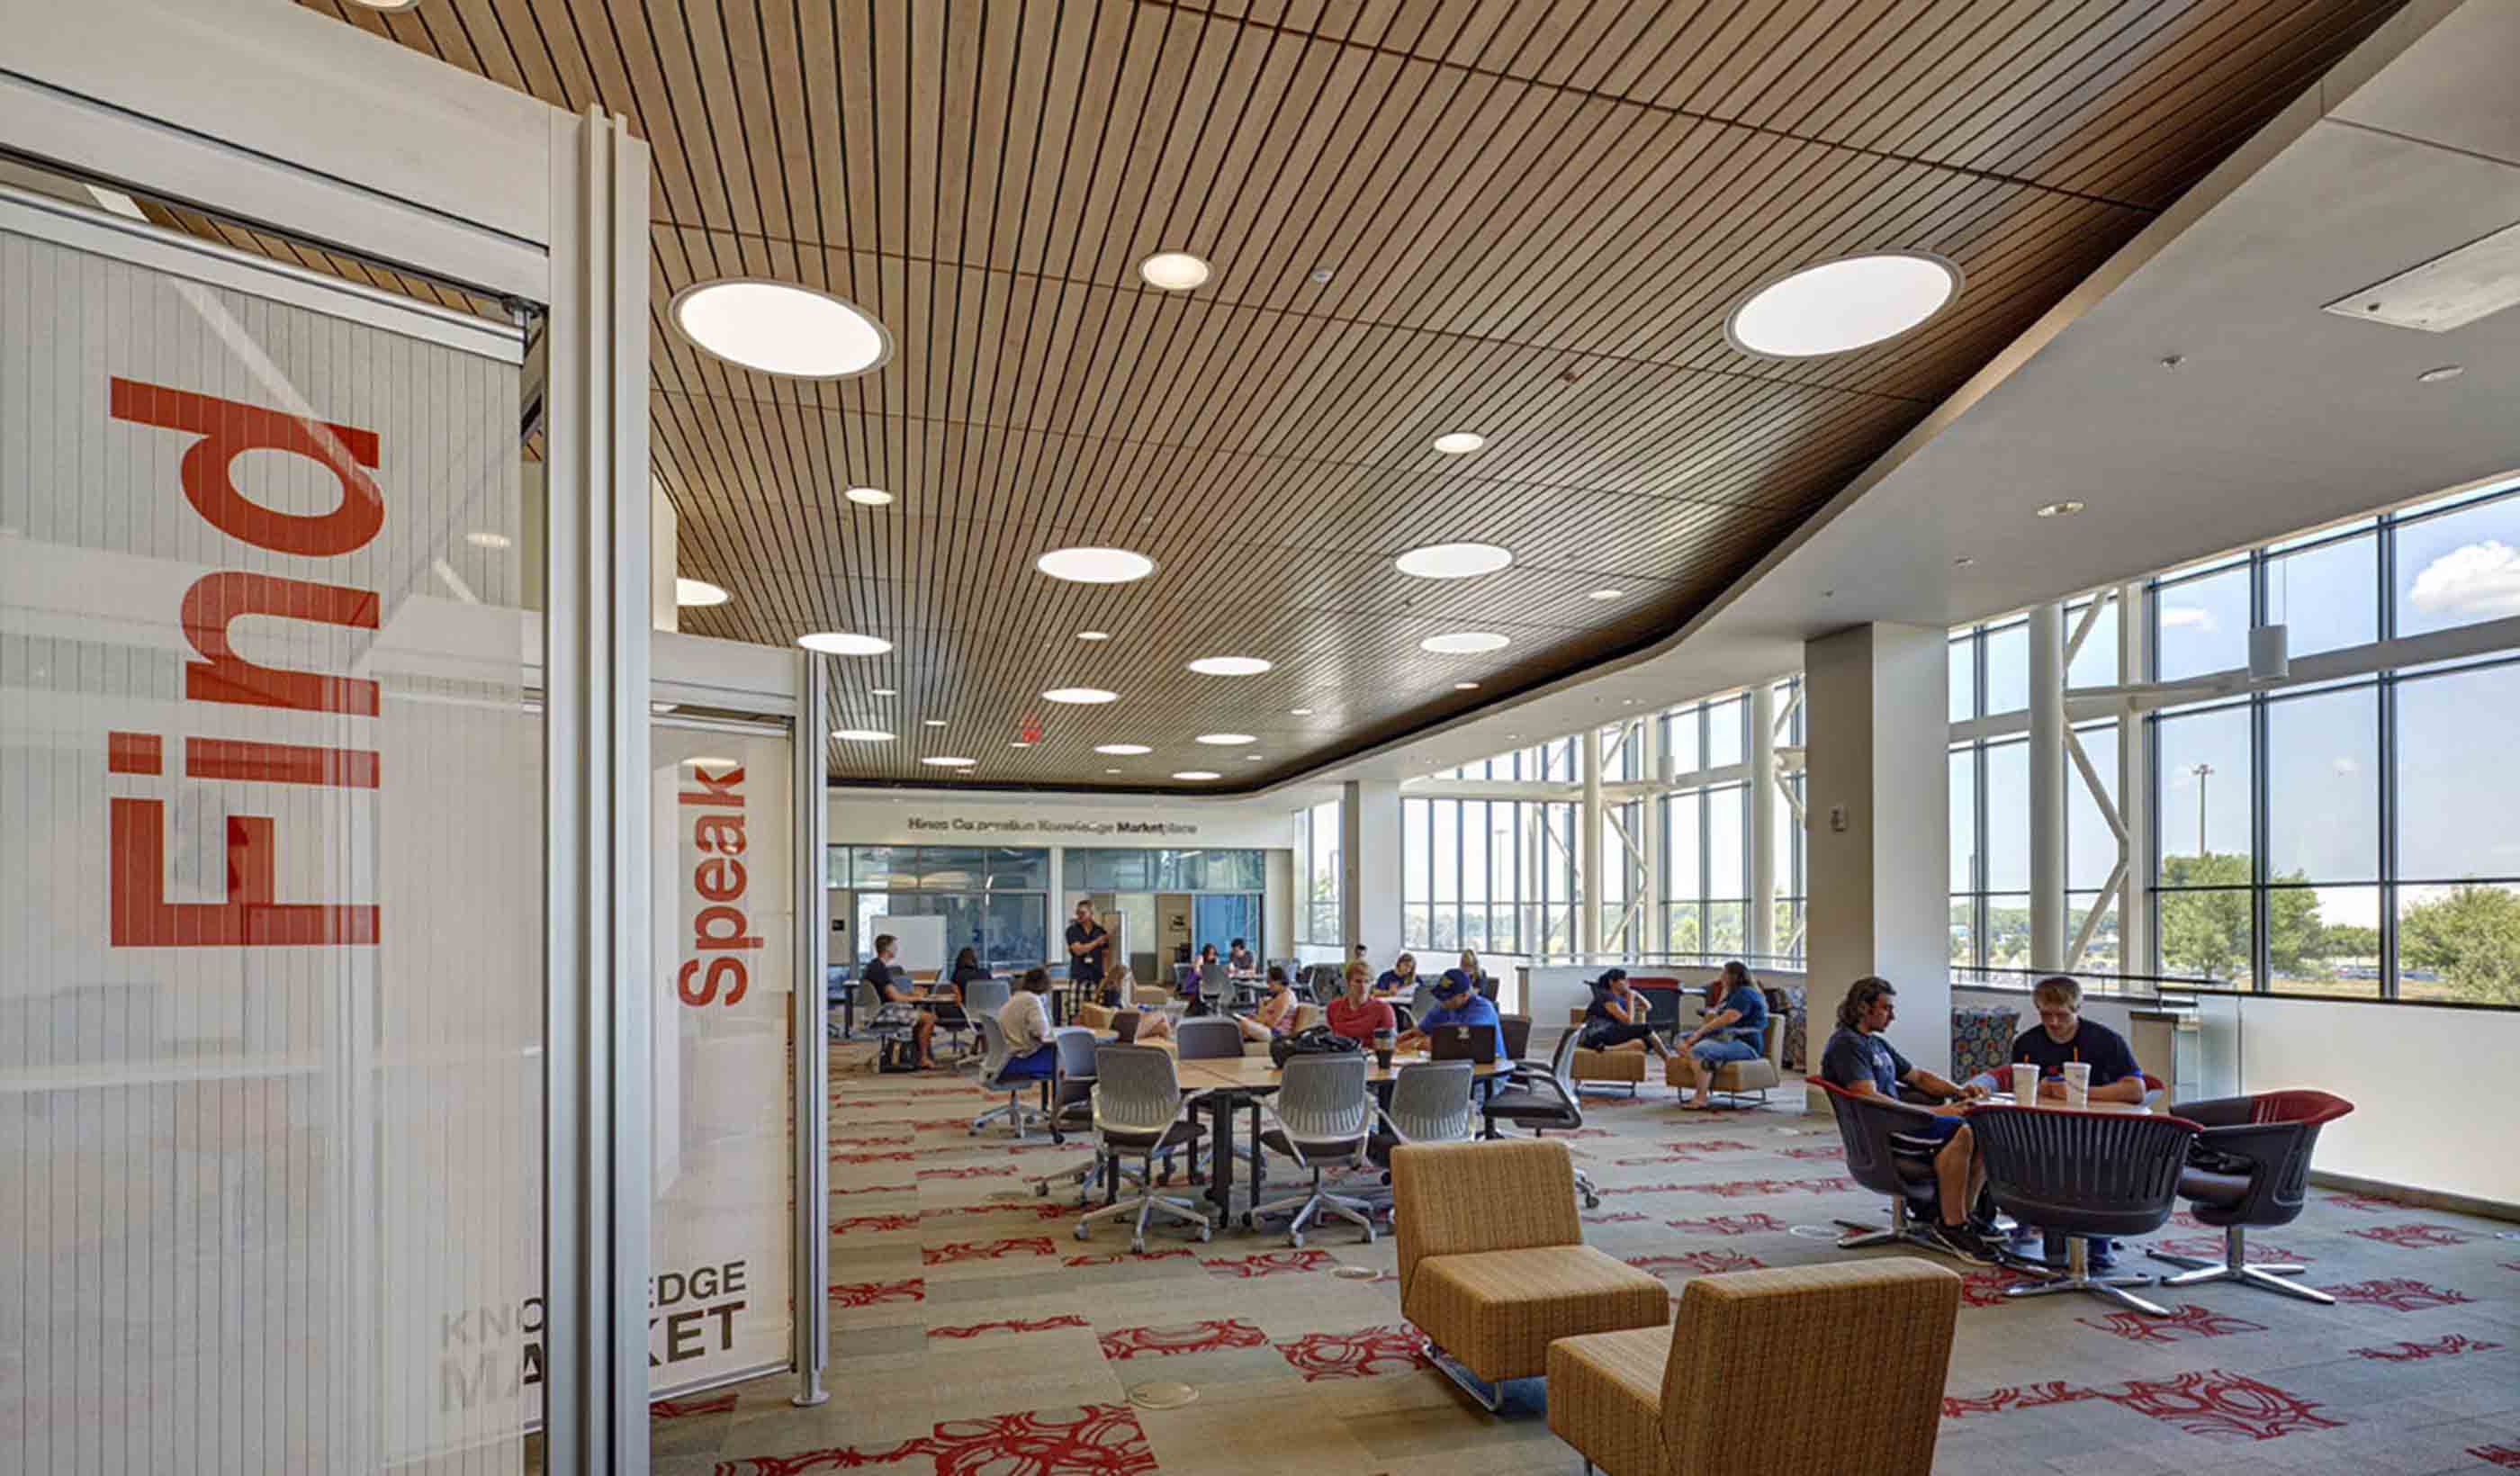 Research and benchmarking: Revisiting a 21st century library a decade after design 